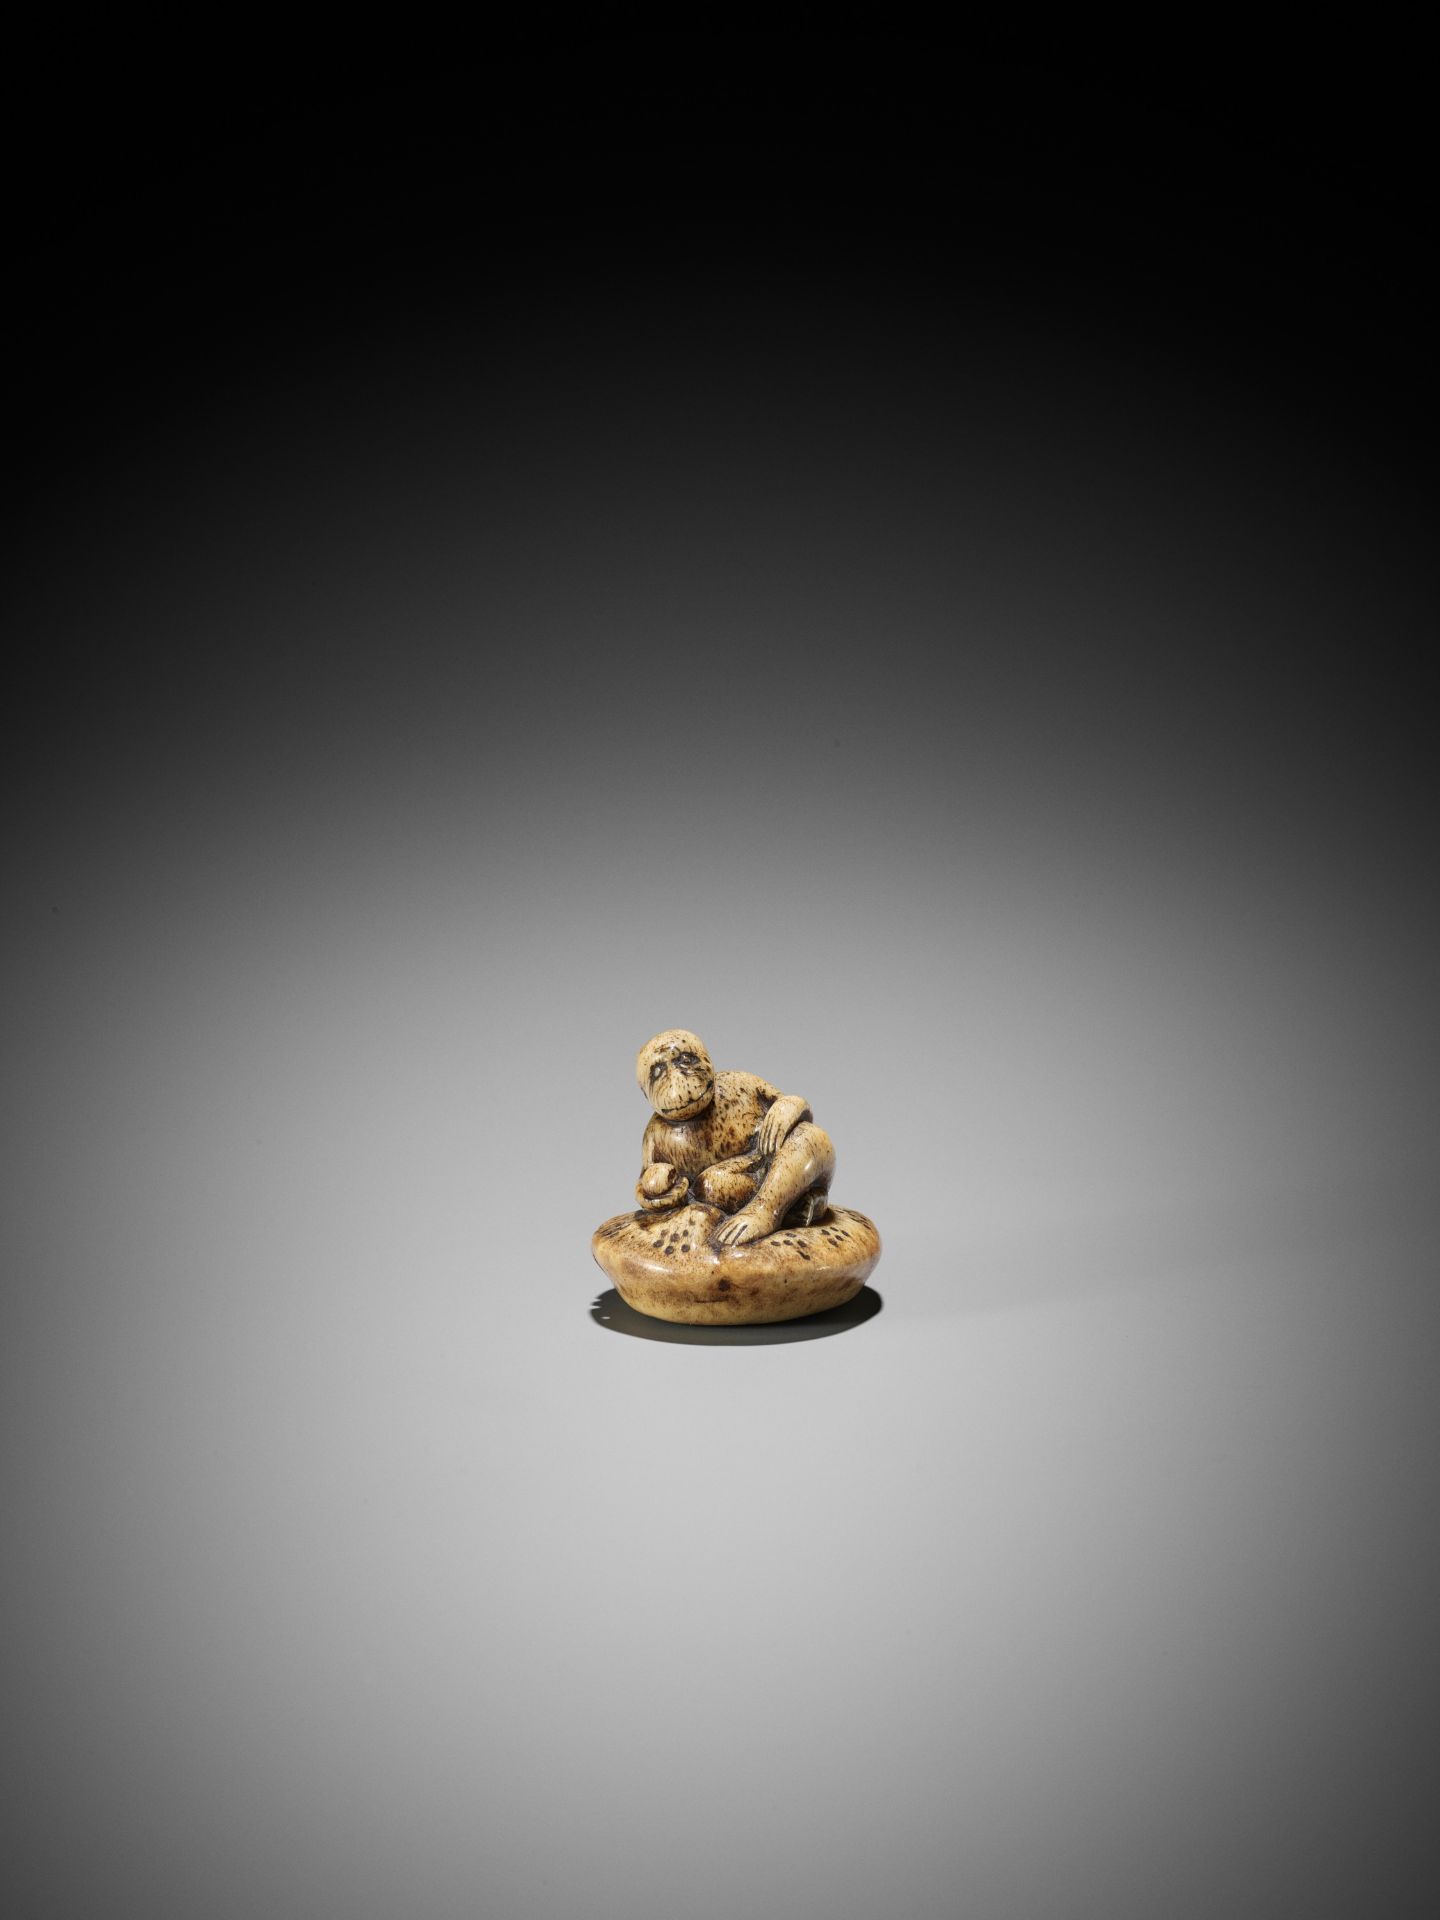 A STAG ANTLER NETSUKE OF A MONKEY HOLDING A PEACH - Image 3 of 8